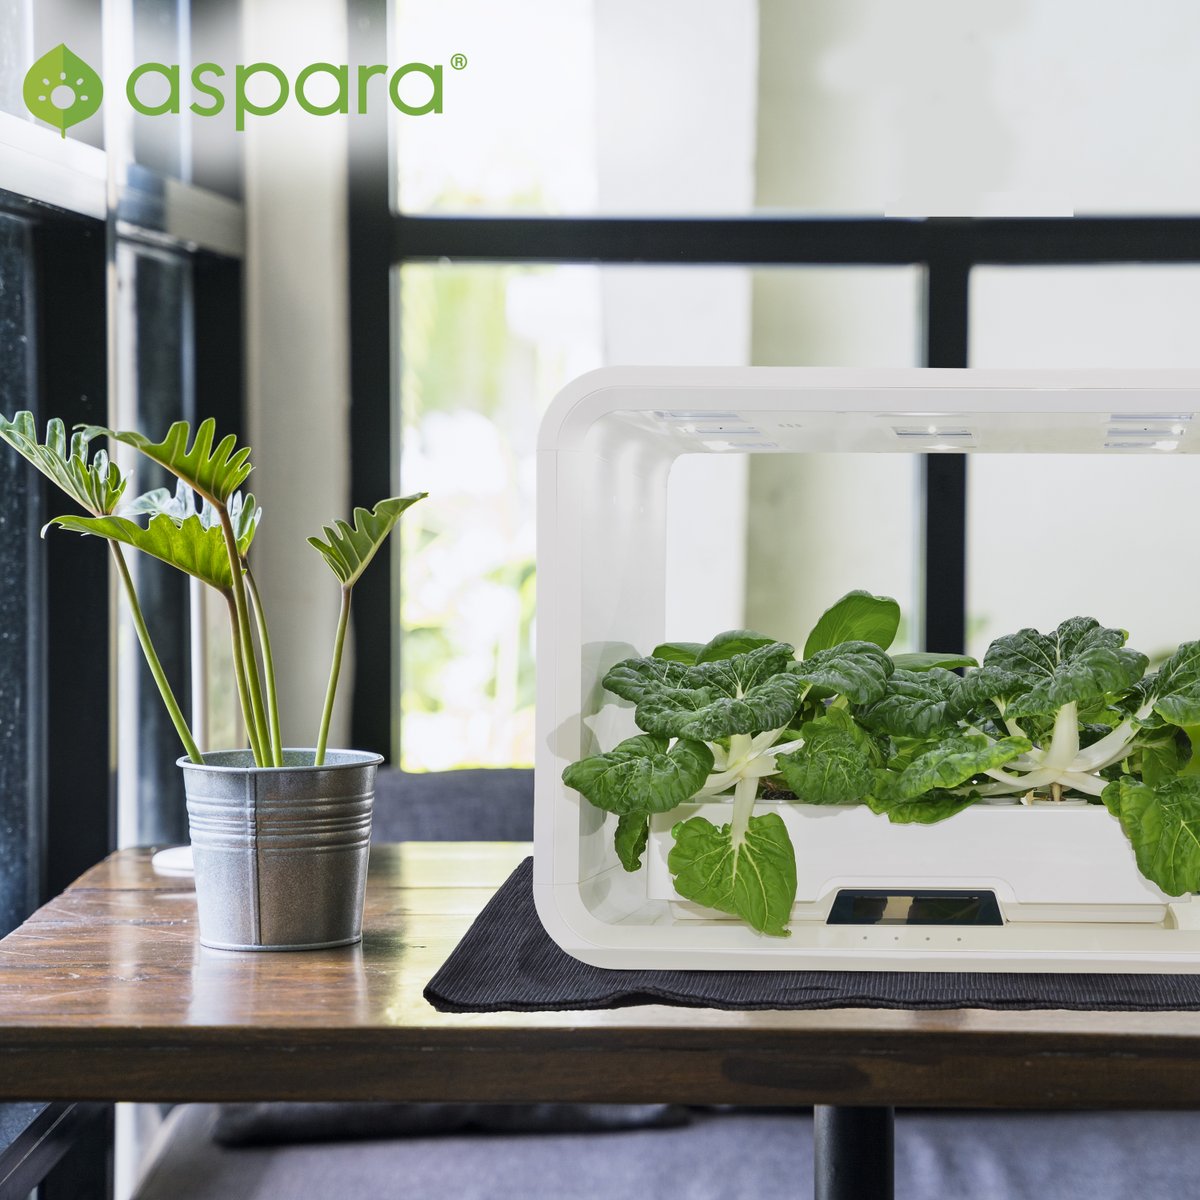 🌿 Live a greener life with aspara 🌱​
-​
Learn more about aspara: aspara.hk​
Order now: aspara.hk/shop​
-​
#aspara #smartgrower #hydroponics #indoor #homegrown #garden #herb #veggies #fruits #flowers #seed #growyourown #smartsensor #smartwatering #green